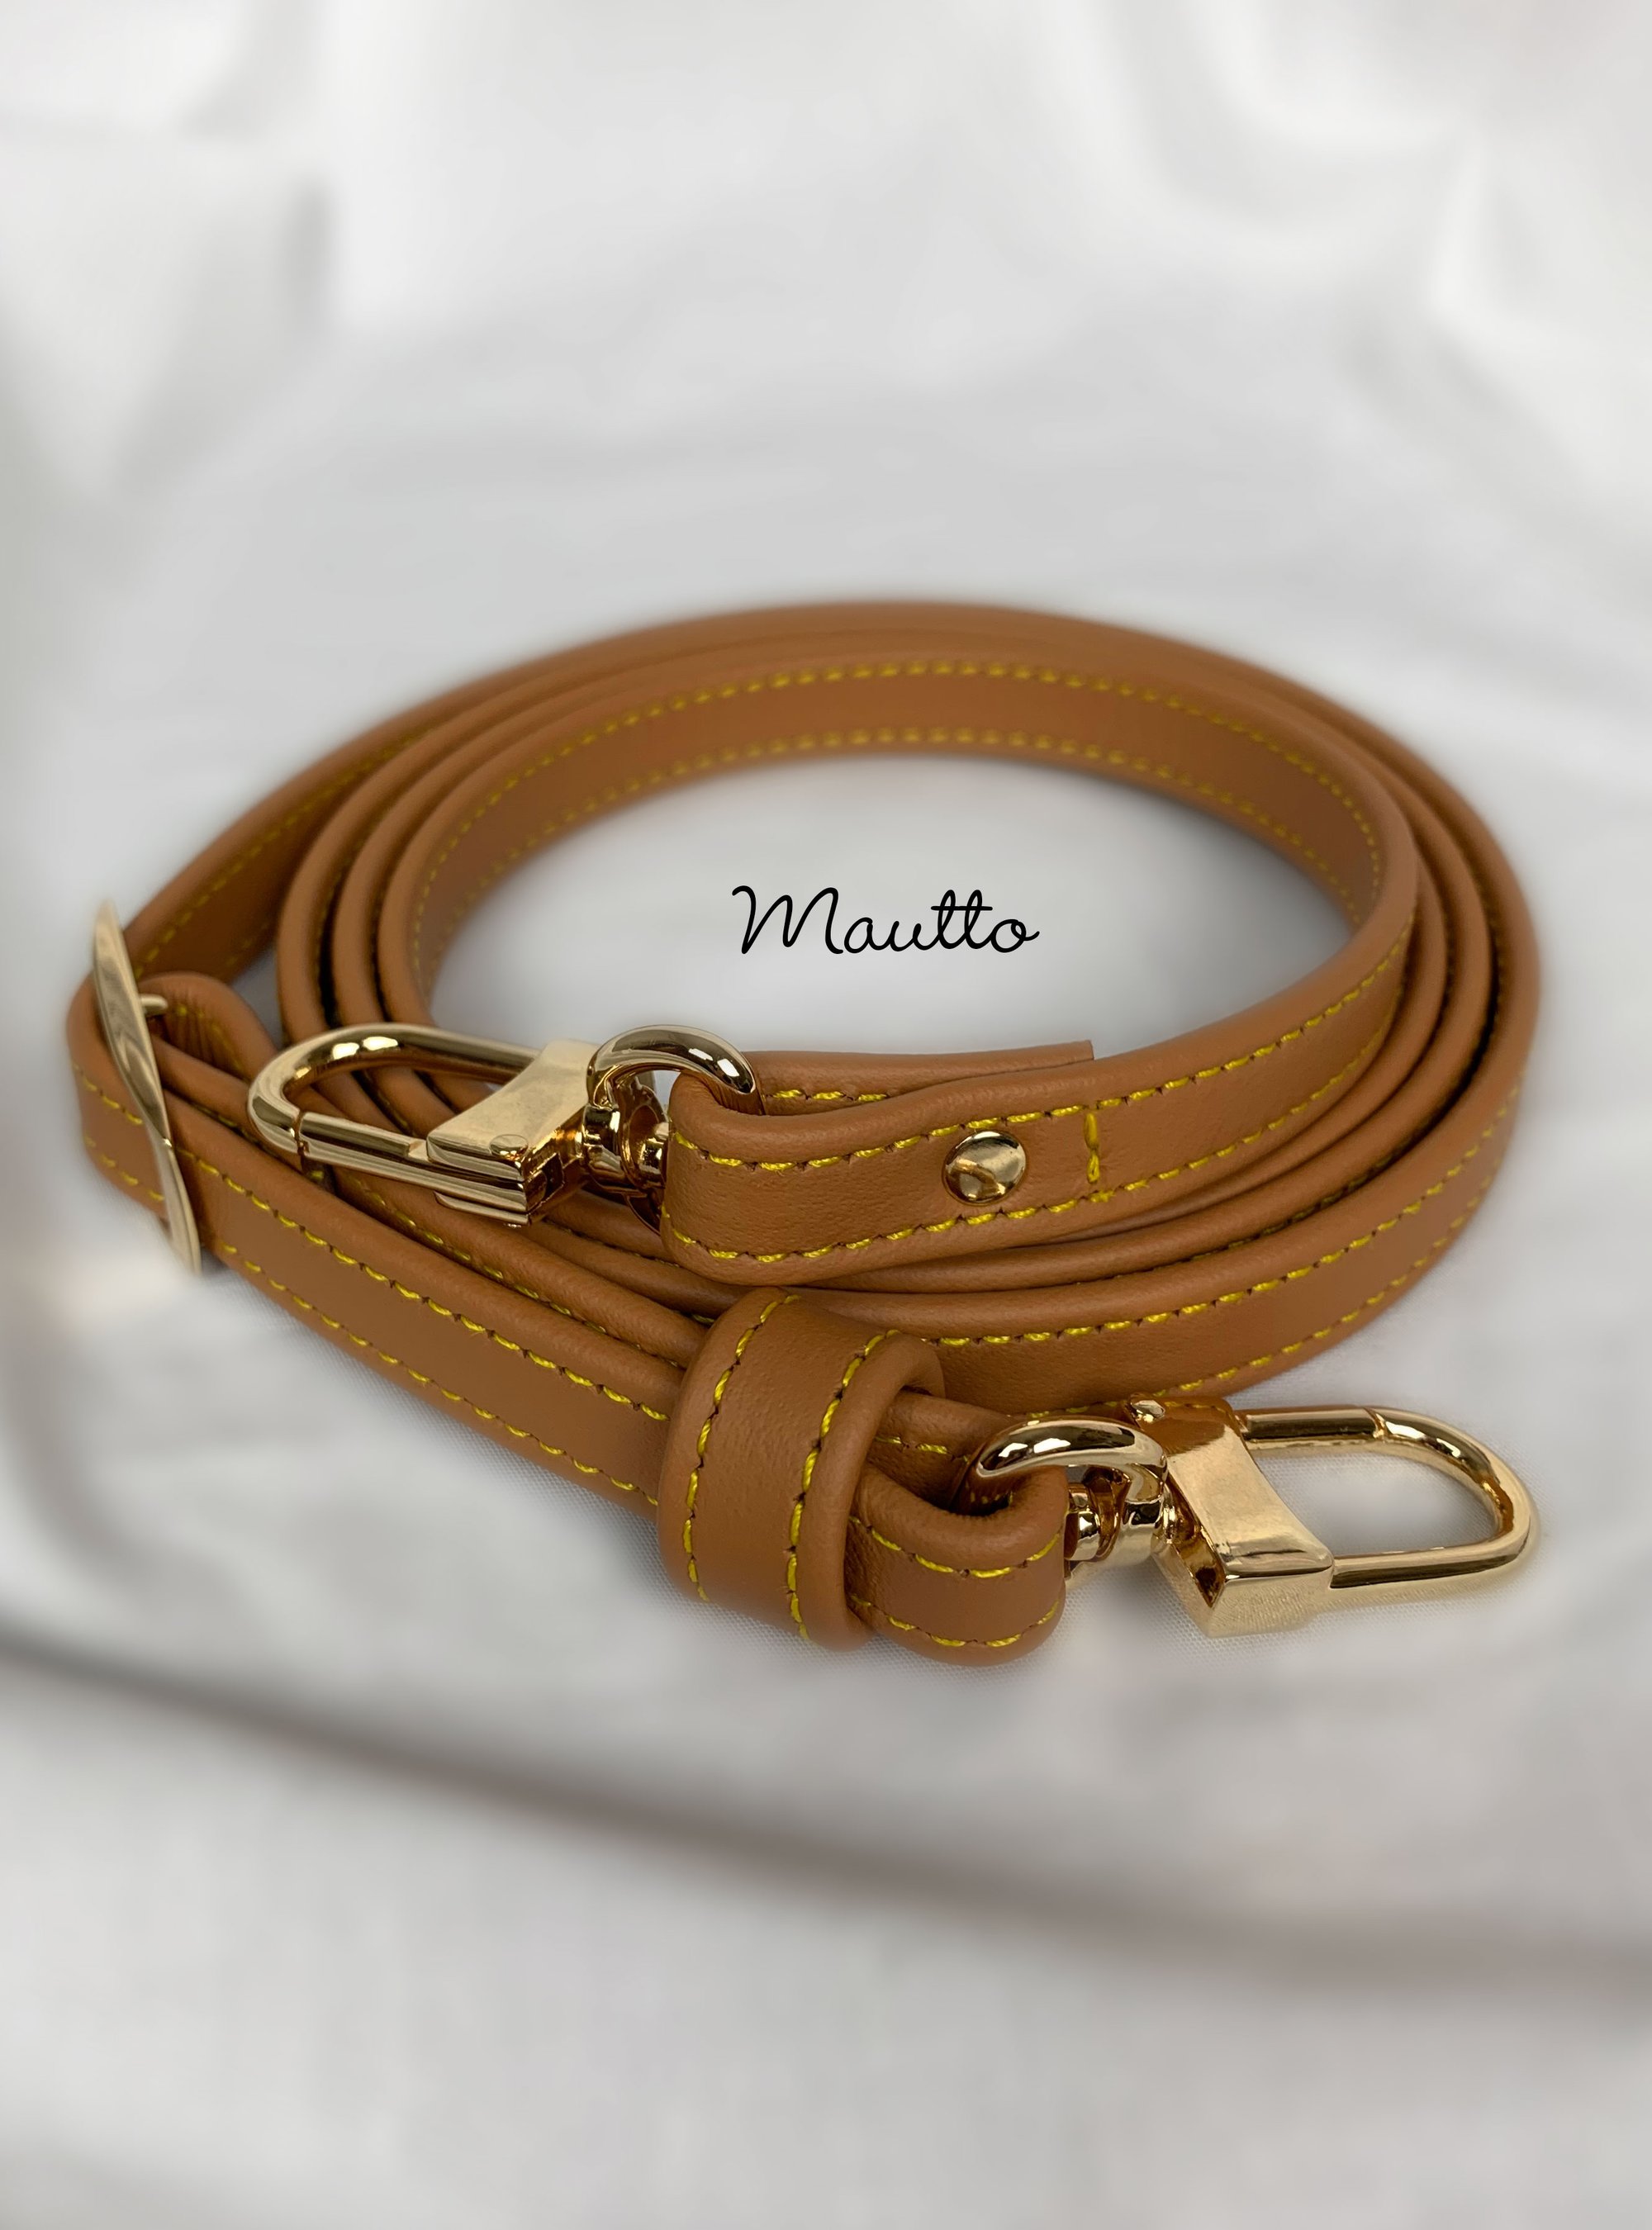 Formand fusion Udvalg Tan Leather Strap with Yellow Stitching for Louis Vuitton (LV), Coach &  More - .5" Petite Width | Replacement Purse Straps & Handbag Accessories -  Leather, Chain & more | Mautto